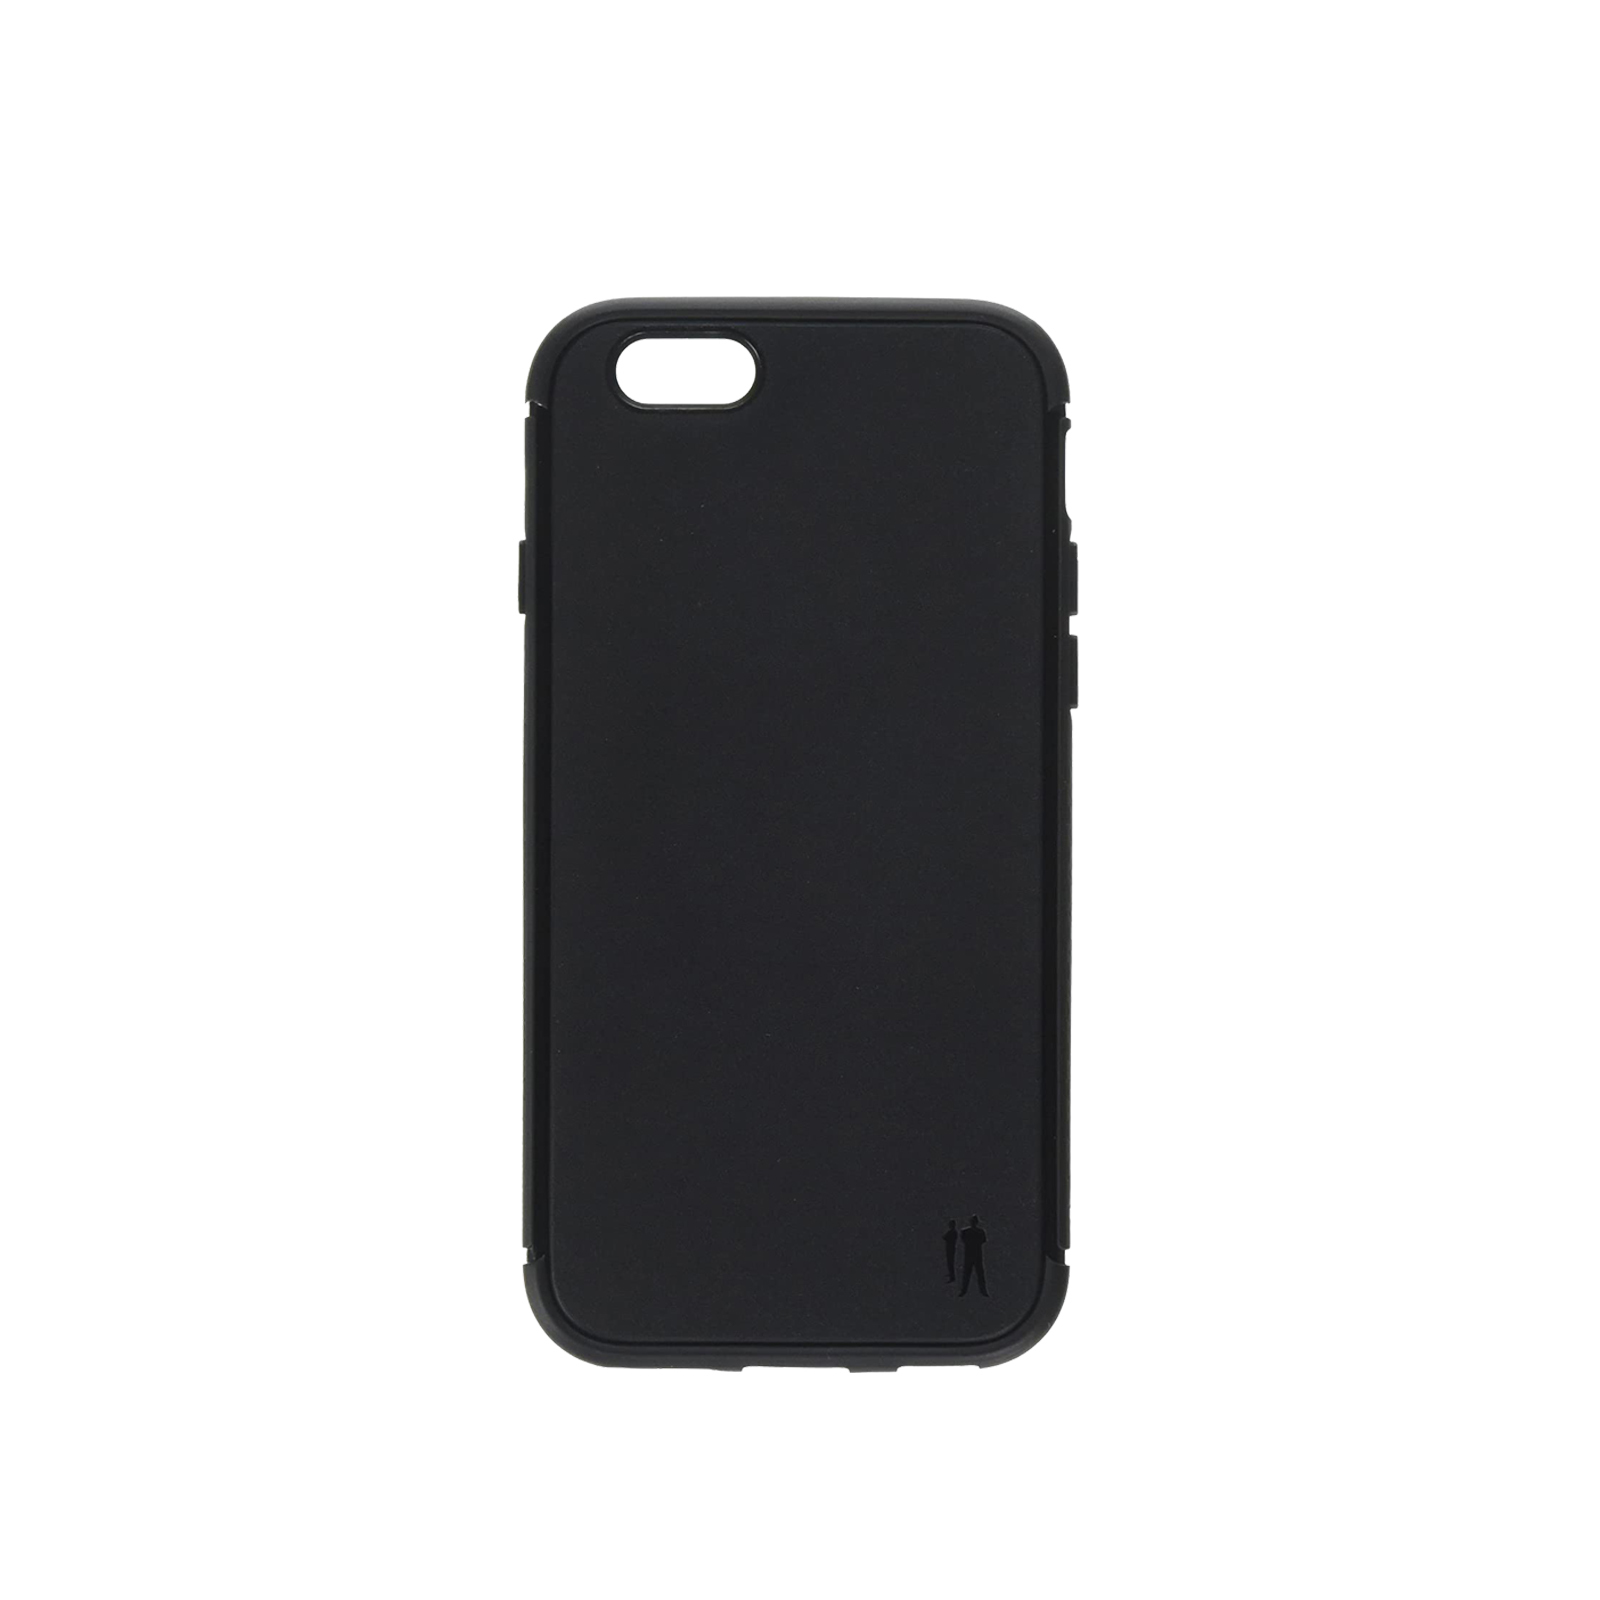 Contact iPhone 6 / 7 Case [Black]